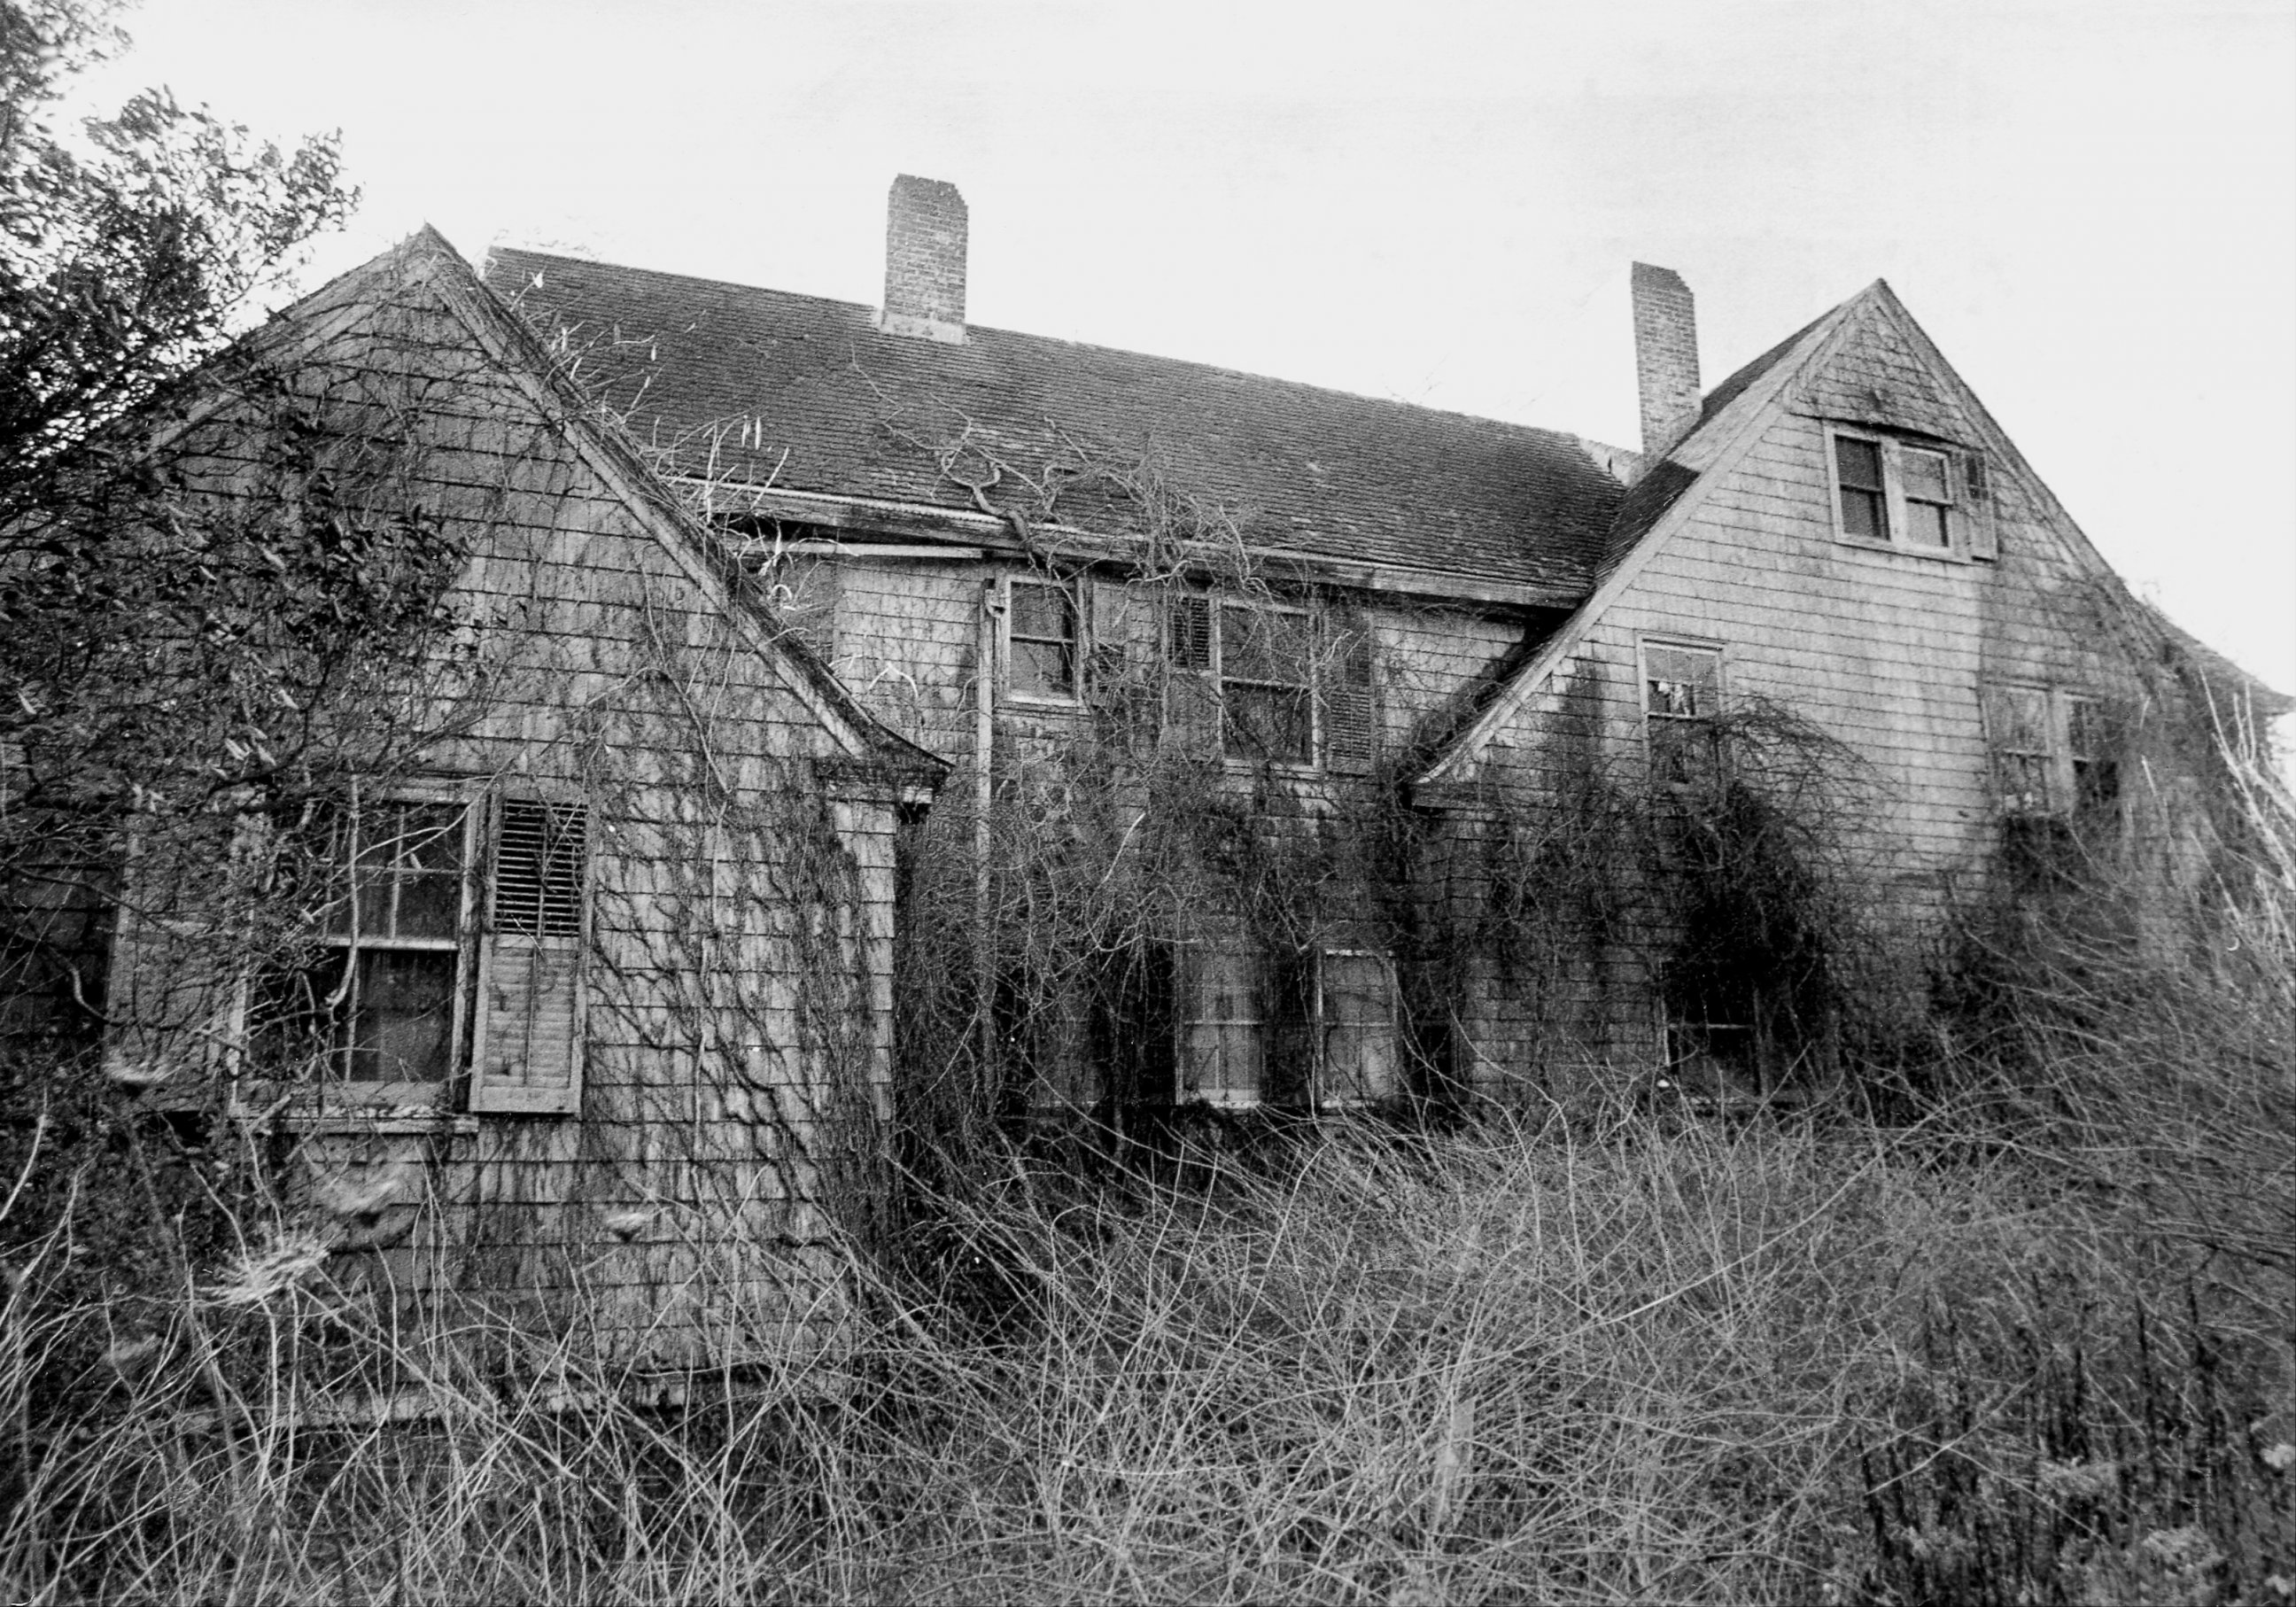 PHOTO: The mansion of Edith Bouvier Beale at West End Road in East Hampton, Long Island known as Grey Gardens, July 23, 1972.